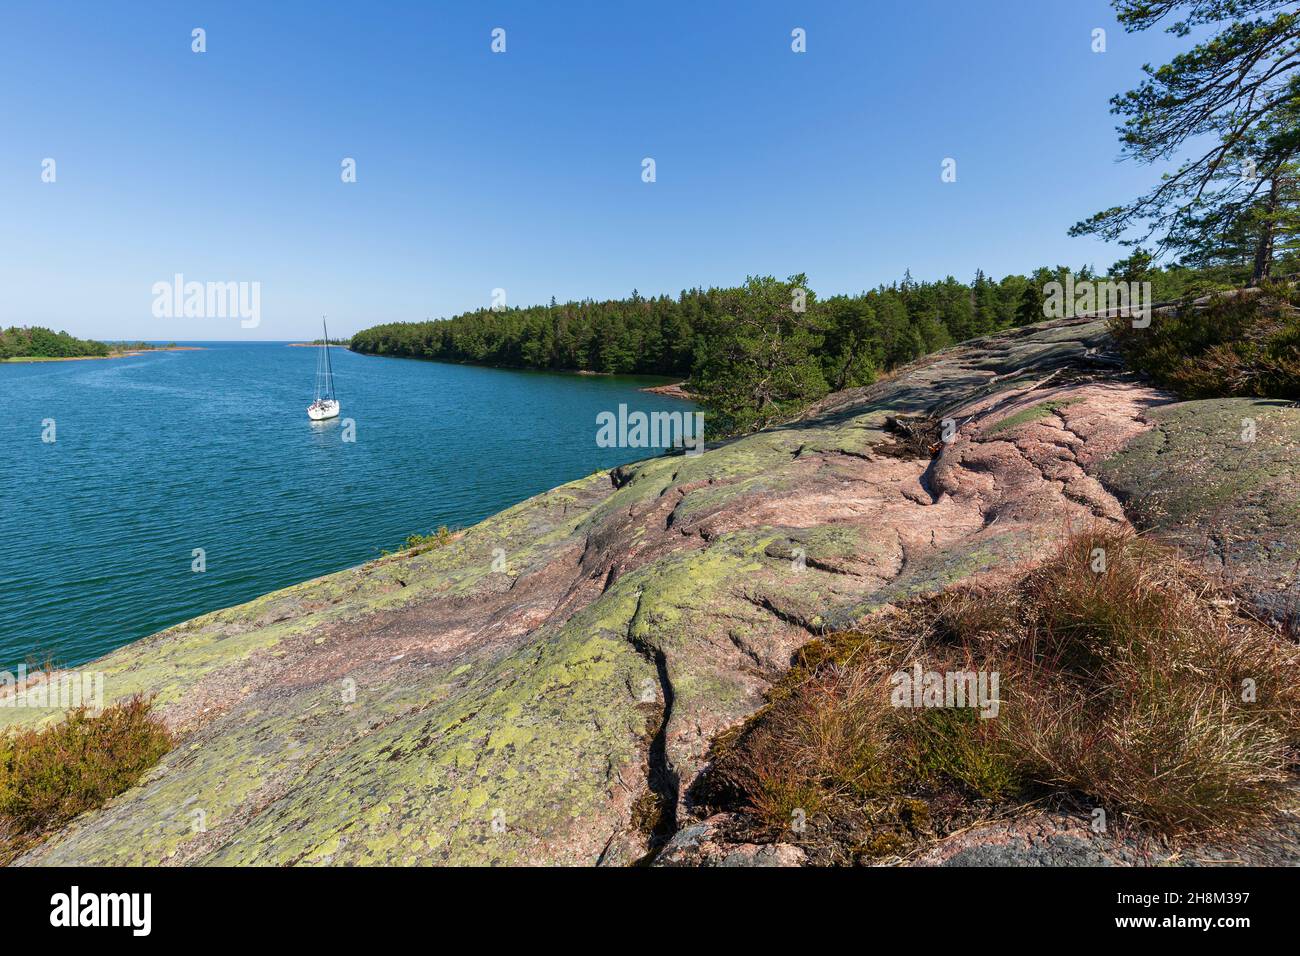 View of a moored sailboat at sea and forested shoreline from a cliff along the Grottstigen cave nature trail at Geta in Åland Islands, Finland. Stock Photo